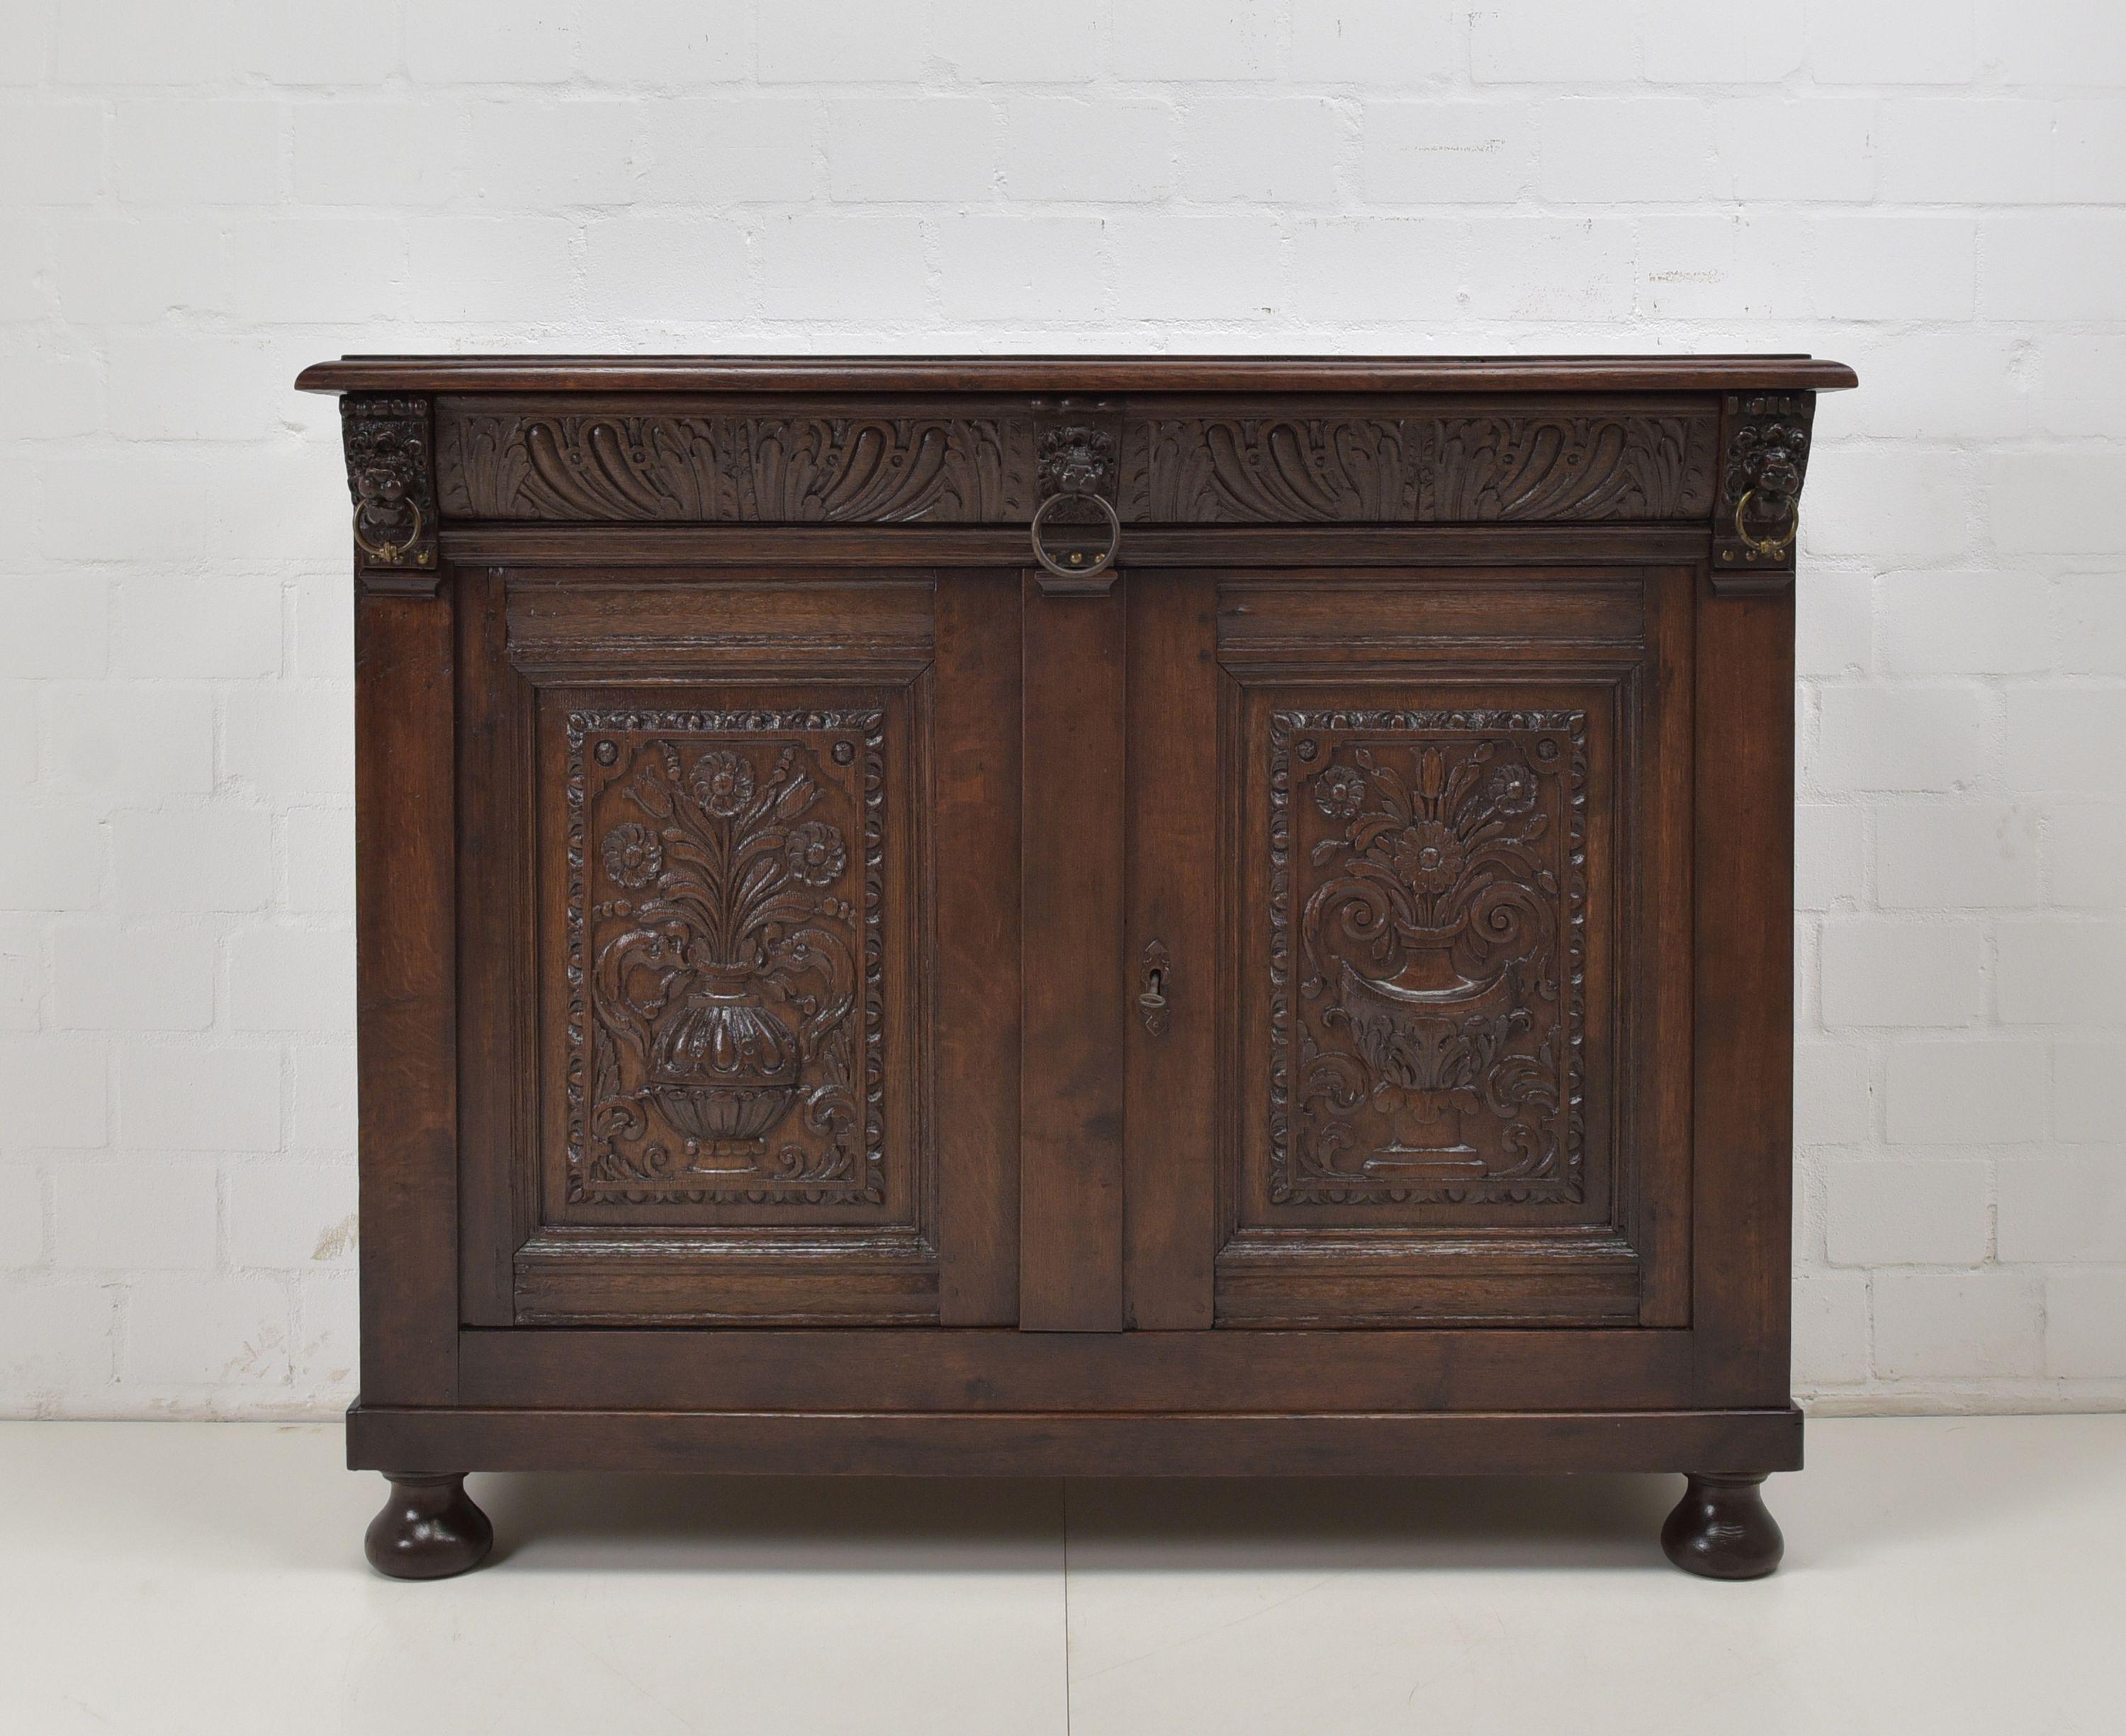 Sideboard chest of drawers restored Renaissance Baroque around 1750 oak cabinet

Features:
Almost entirely solid oak
Only base and rear wall solid softwood
Two-door model with one drawer and one shelf
High quality
Heavy quality
Drawer